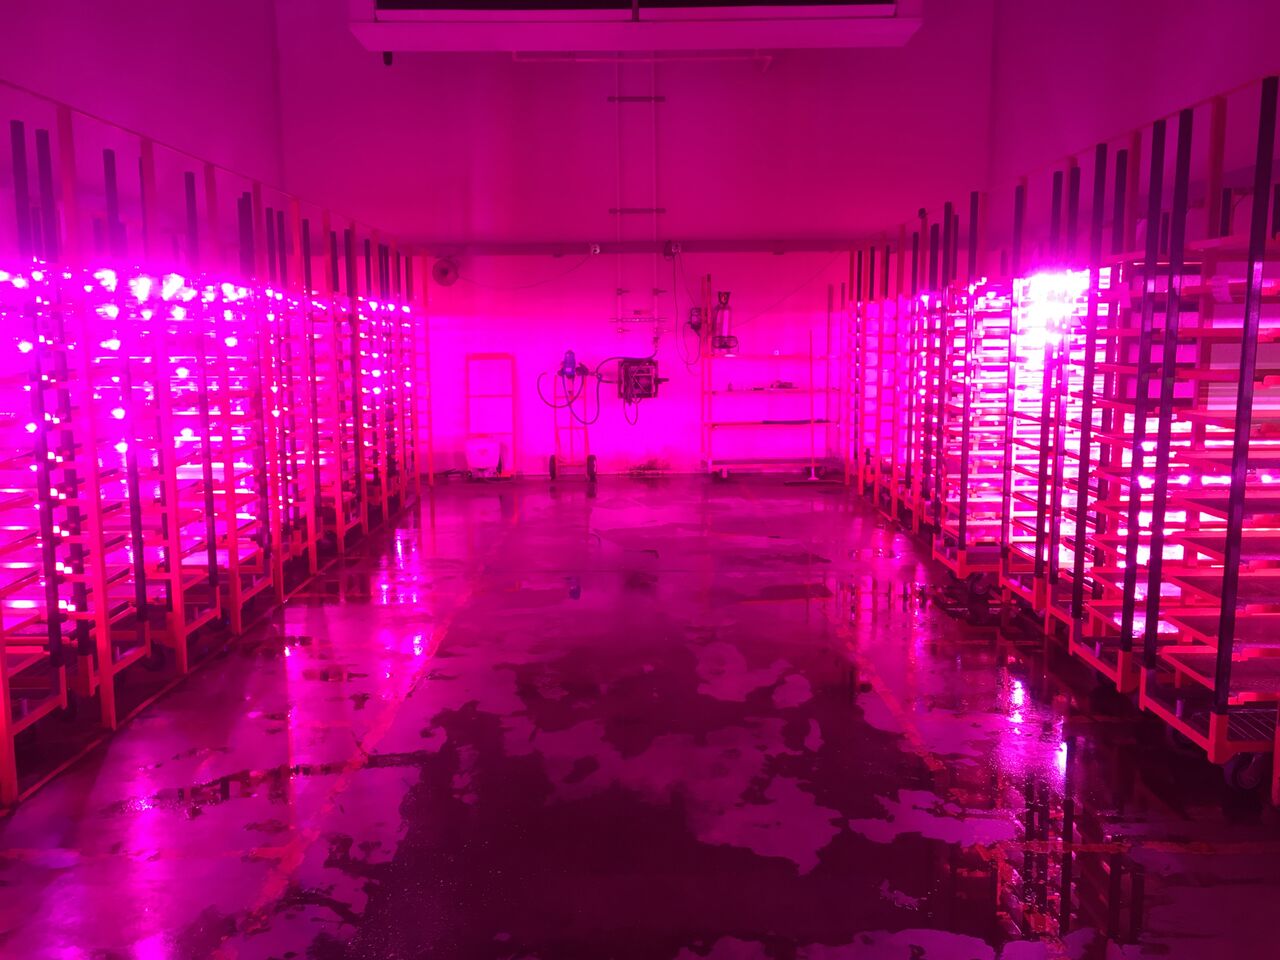 How one grower uses LEDs to improve propagation